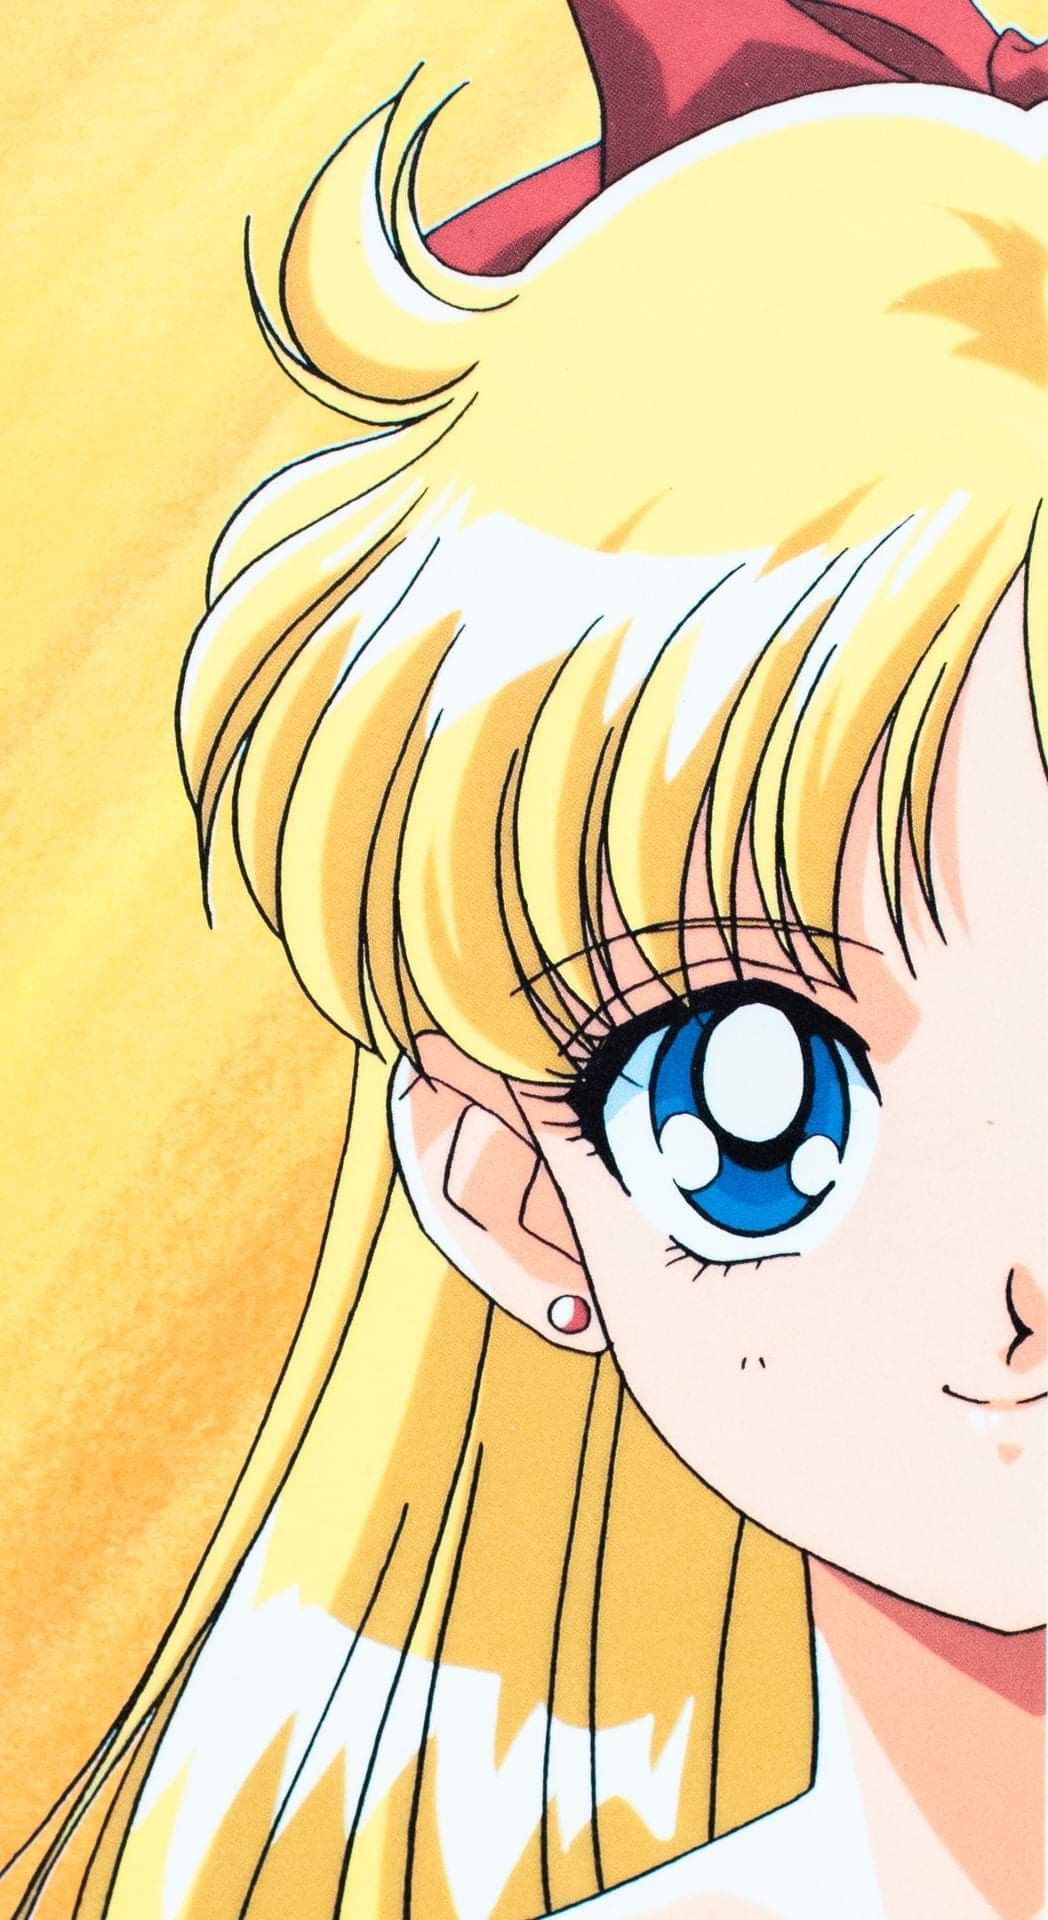 Usagi Tsukino is a character from the anime series Sailor Moon. She is the series' protagonist and central character. - Sailor Venus